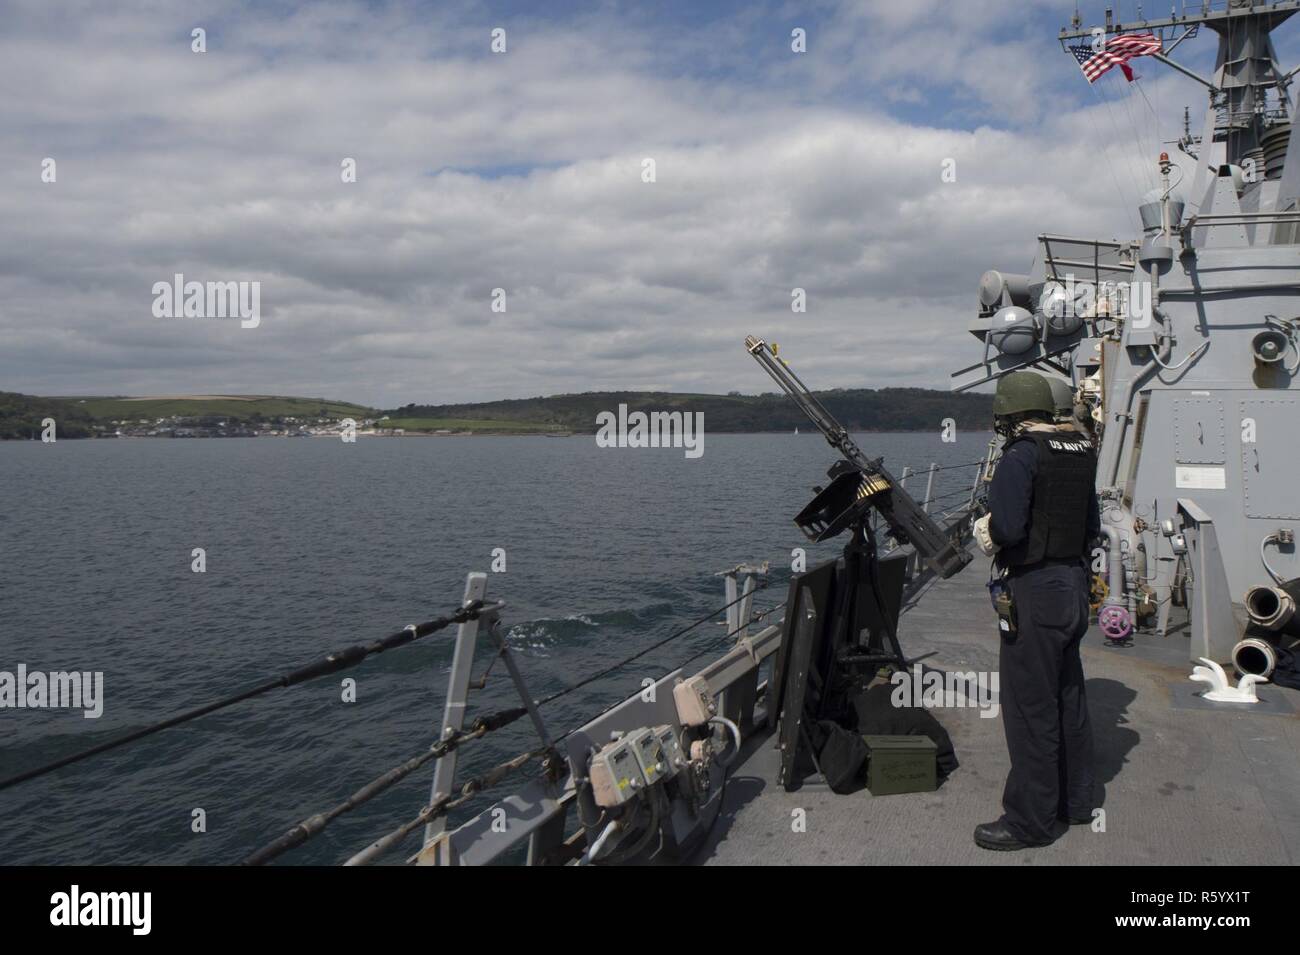 PLYMOUTH, United Kingdom (April 21, 2017) - Sailors aboard USS Carney (DDG 64) man an M2 .50 cal. machine gun as part of the small craft action team as the ship arrives in Plymouth, United Kingdom as it participates in Flag Officer Sea Training April 21, 2017. Carney, an Arleigh Burke-class guided-missile destroyer, forward-deployed to Rota, Spain, is conducting its third patrol in the U.S. 6th Fleet area of operations in support of U.S. national security interests in Europe. Stock Photo